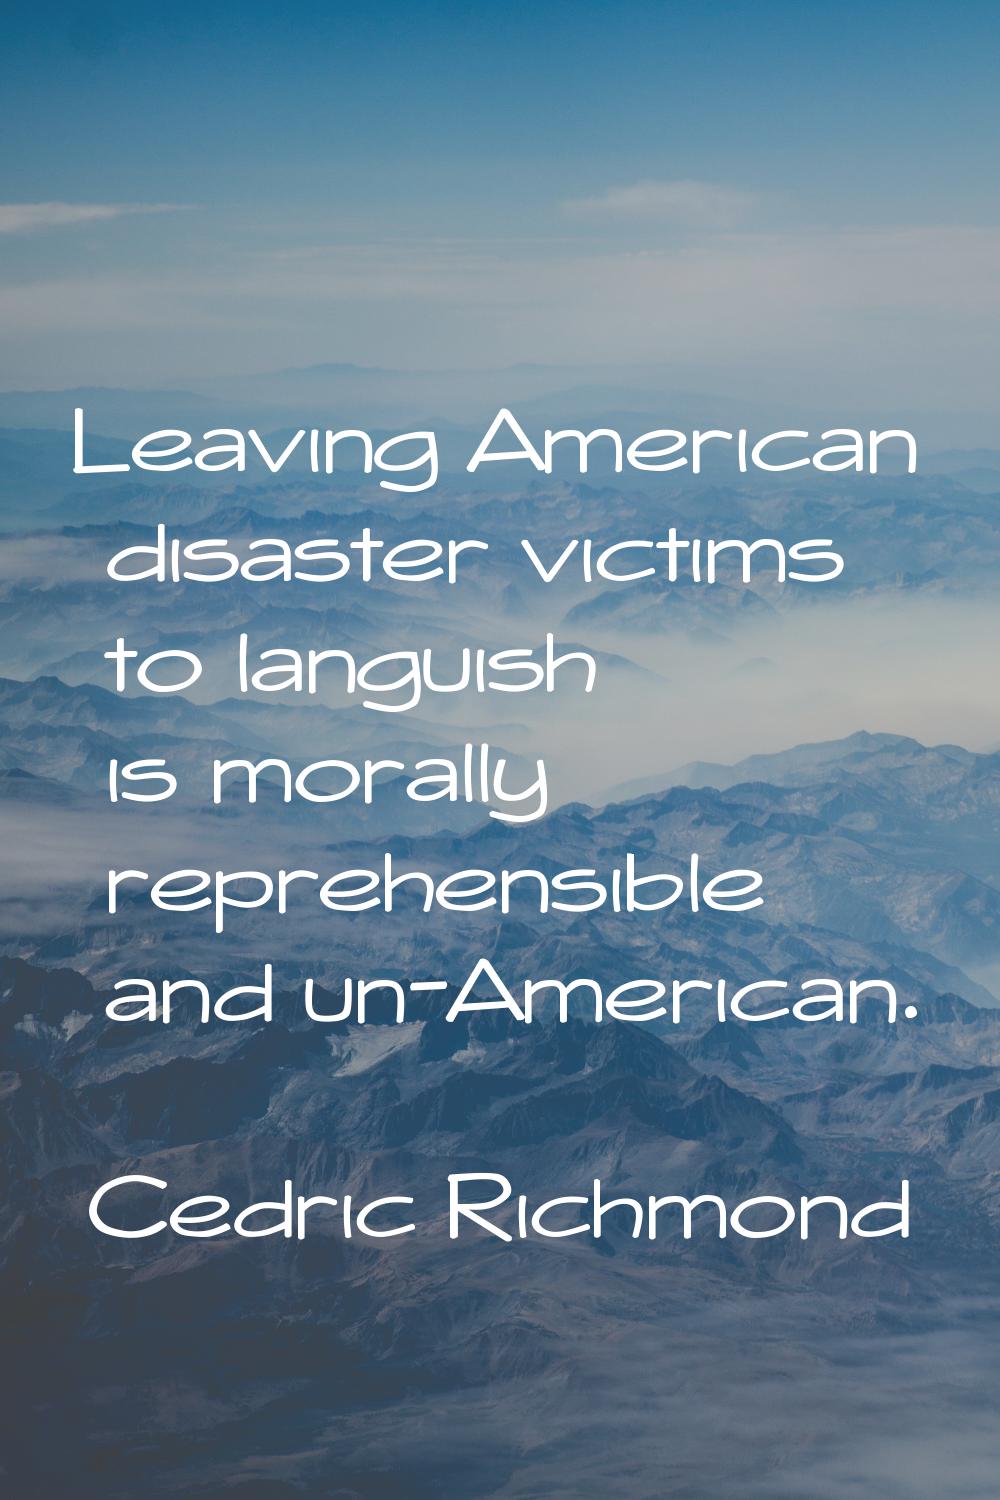 Leaving American disaster victims to languish is morally reprehensible and un-American.